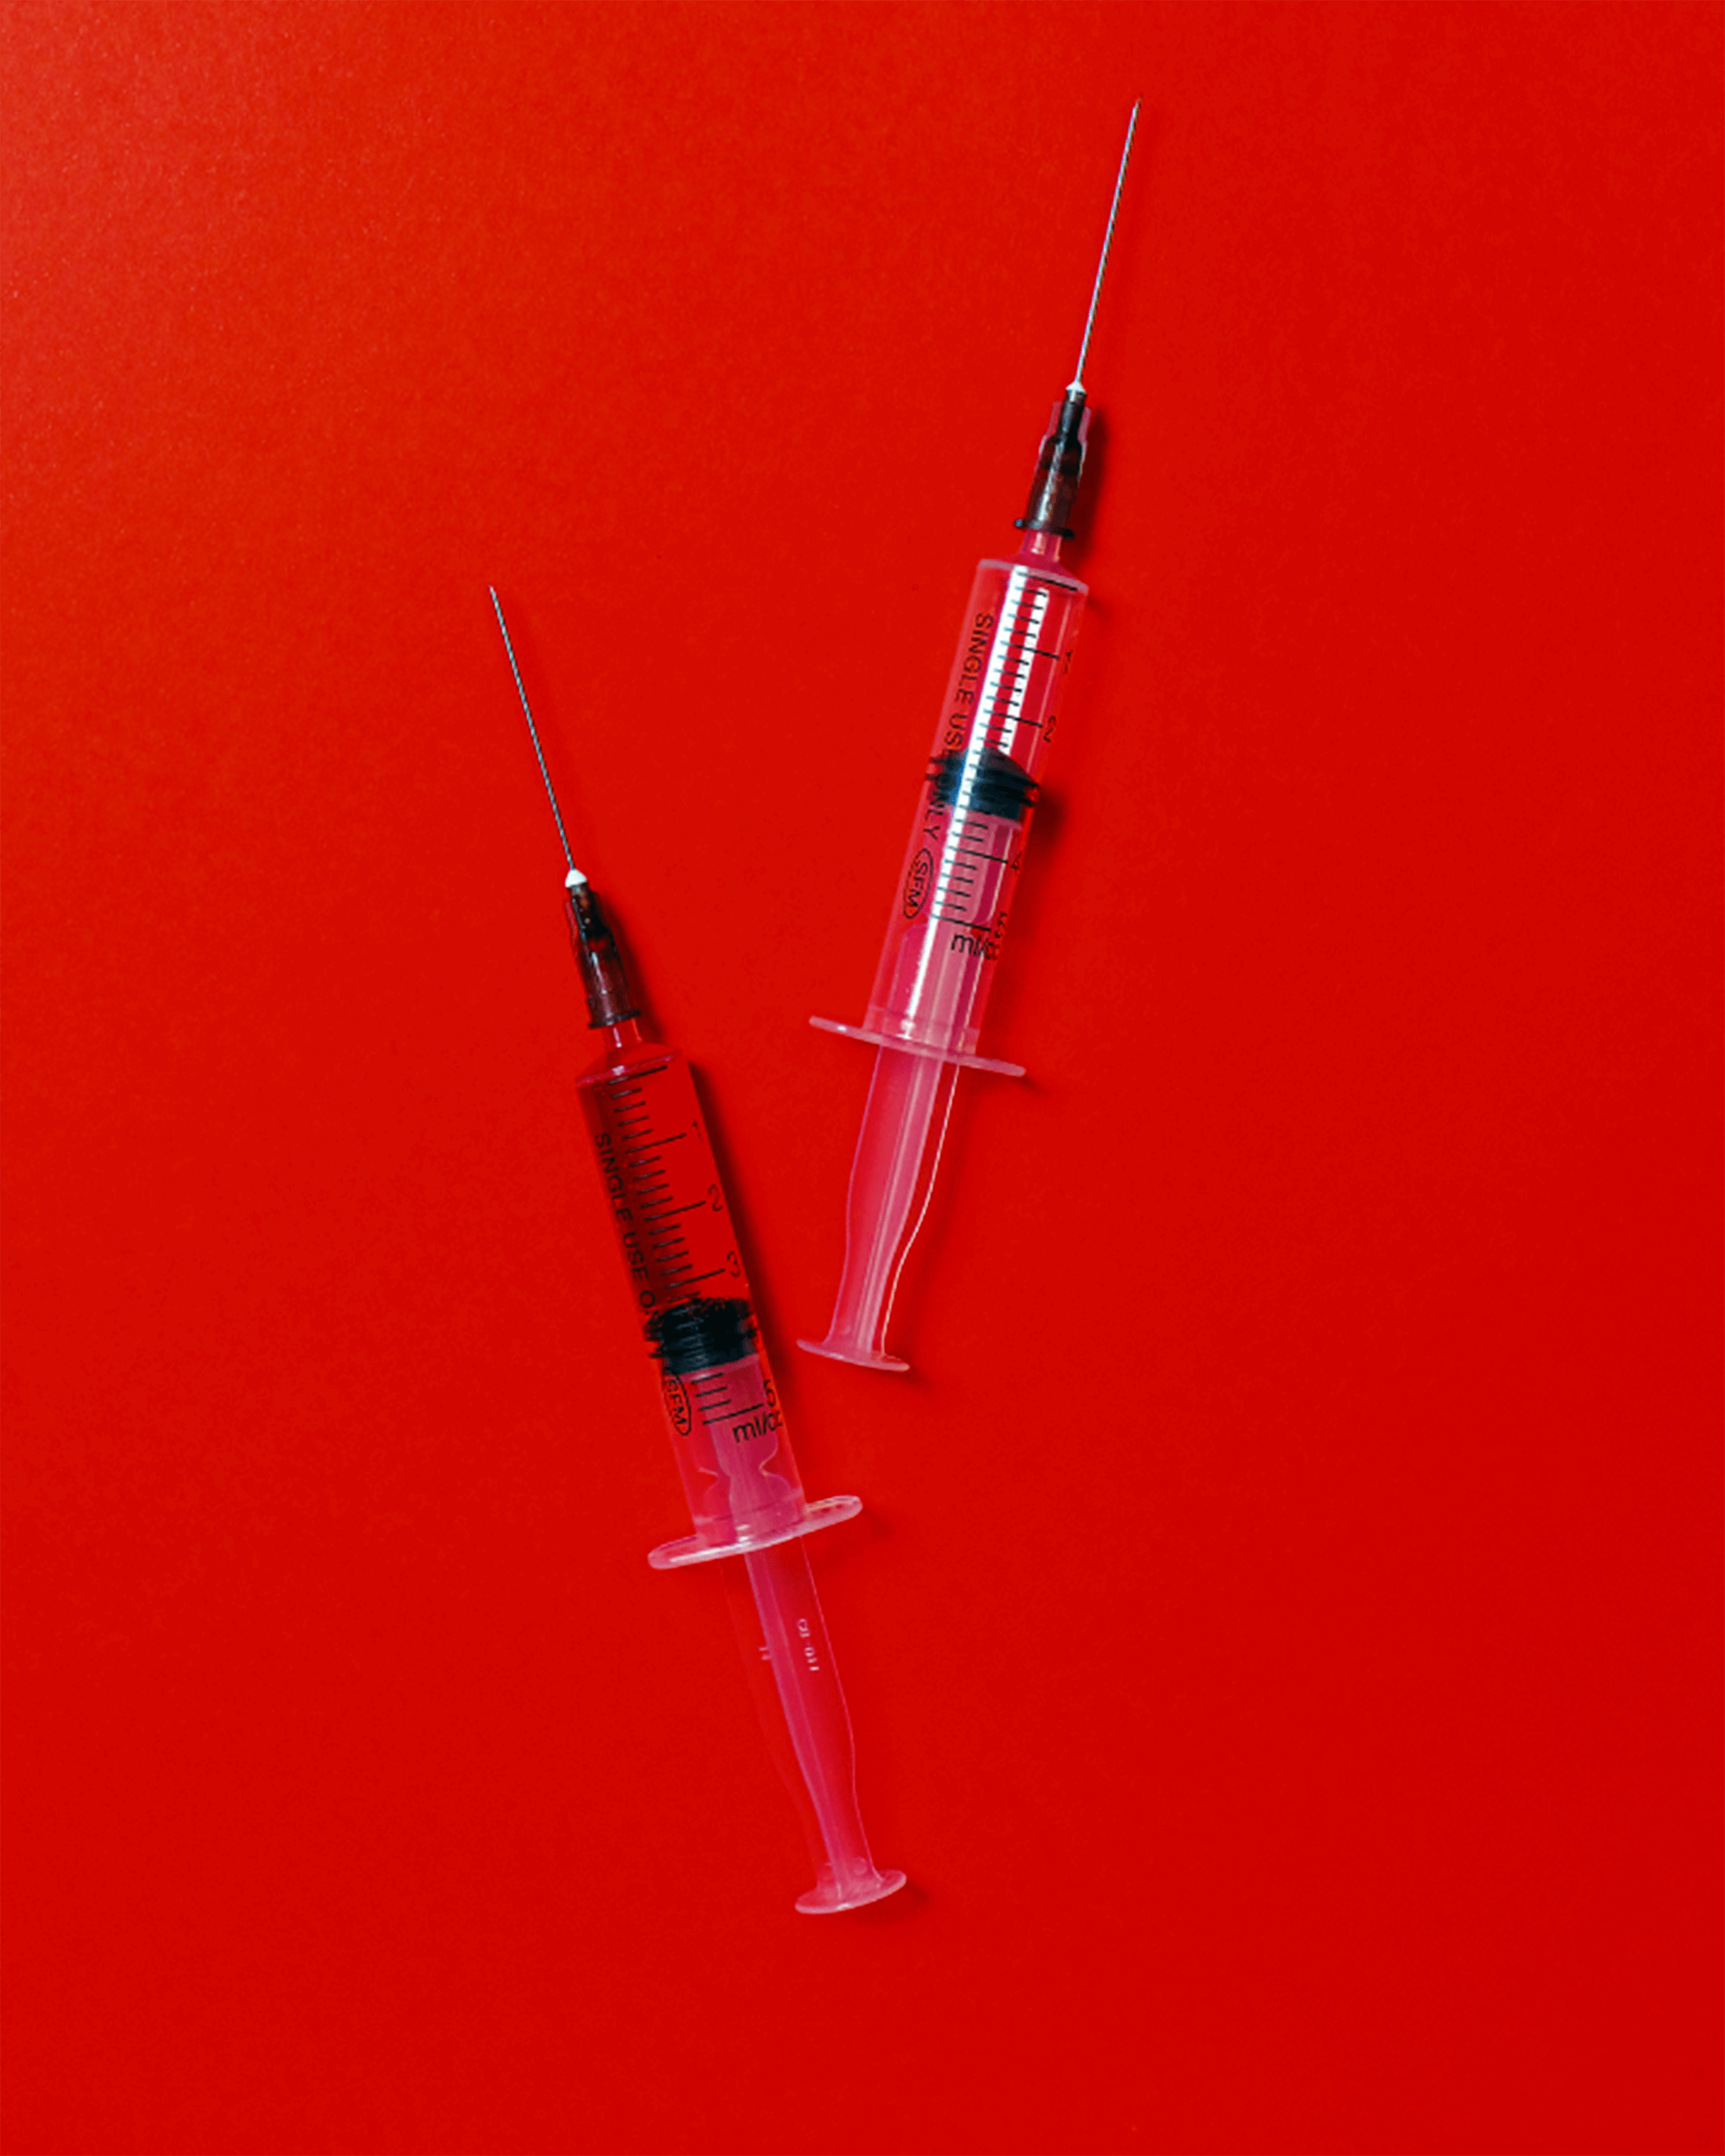 INJECTIONS